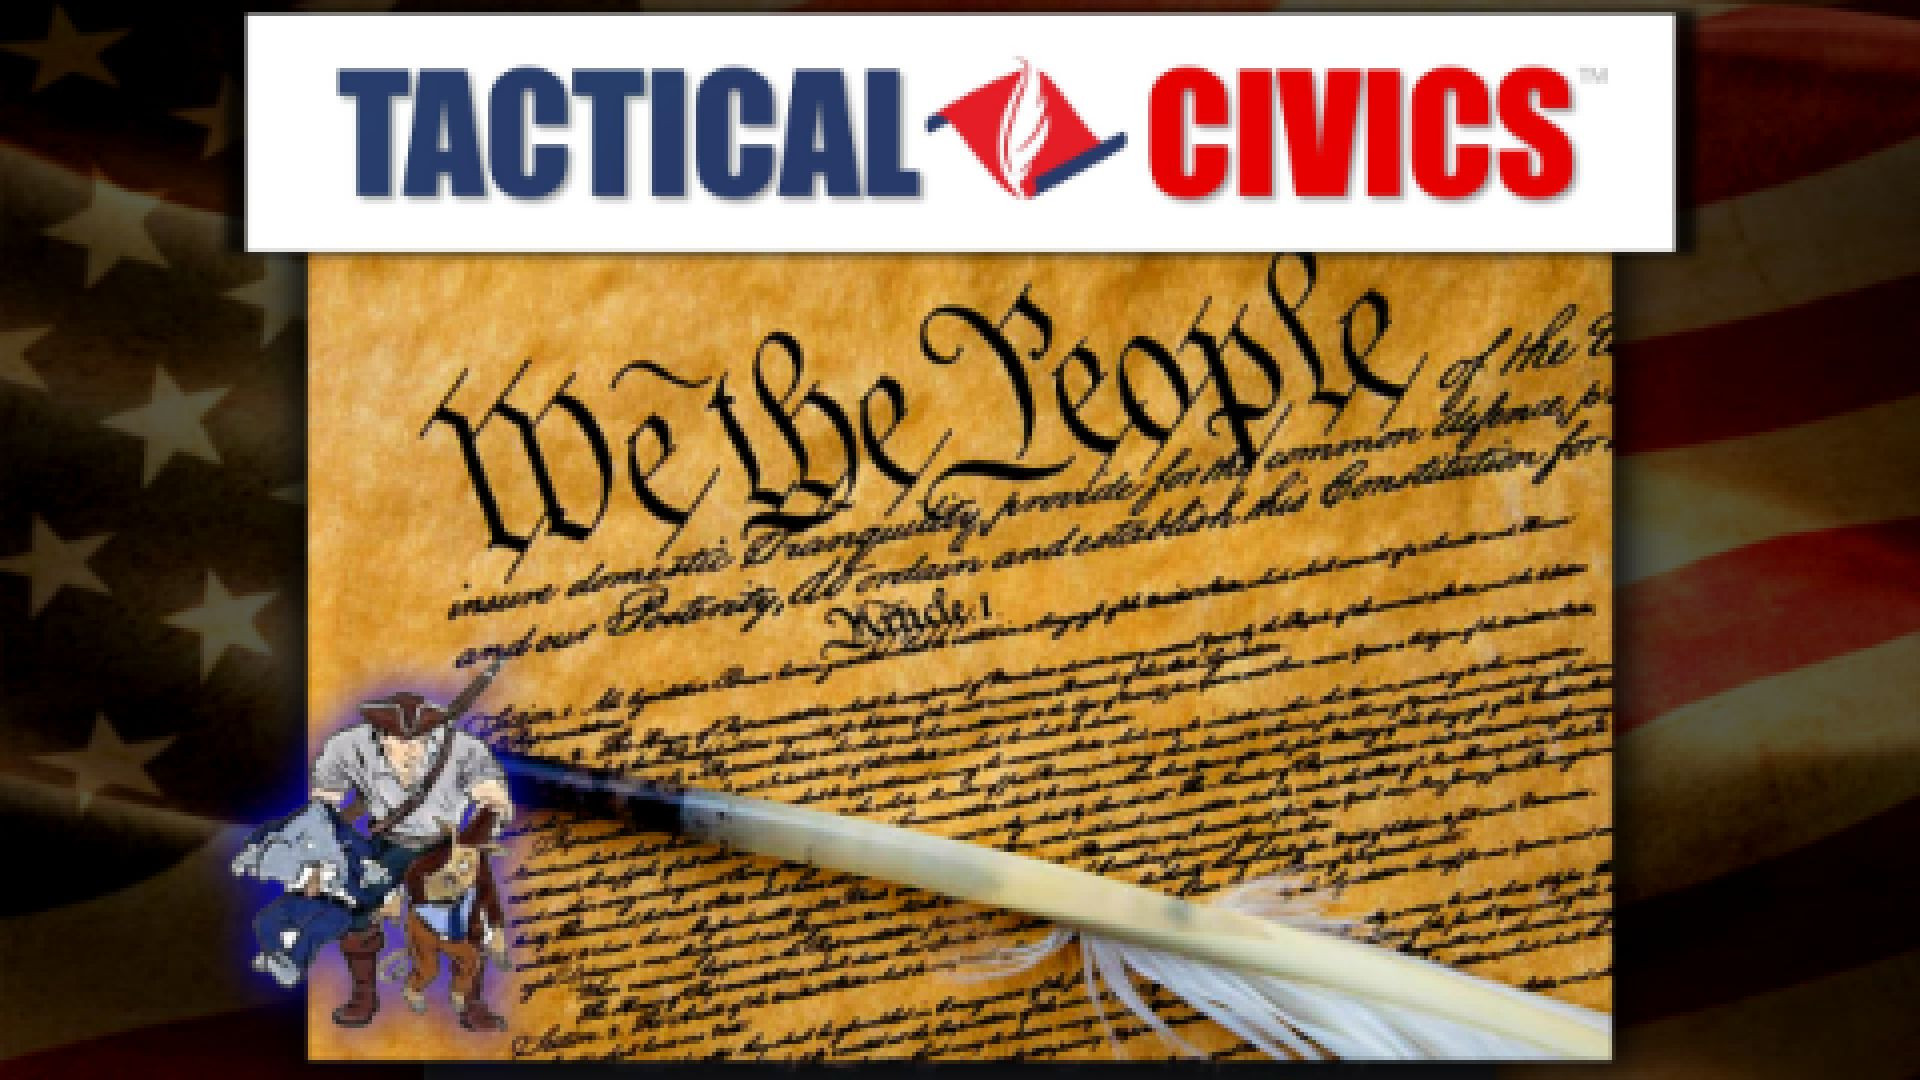 TACTICAL CIVICS Militia Law - The Minute Men - Taking America back, one county at a time